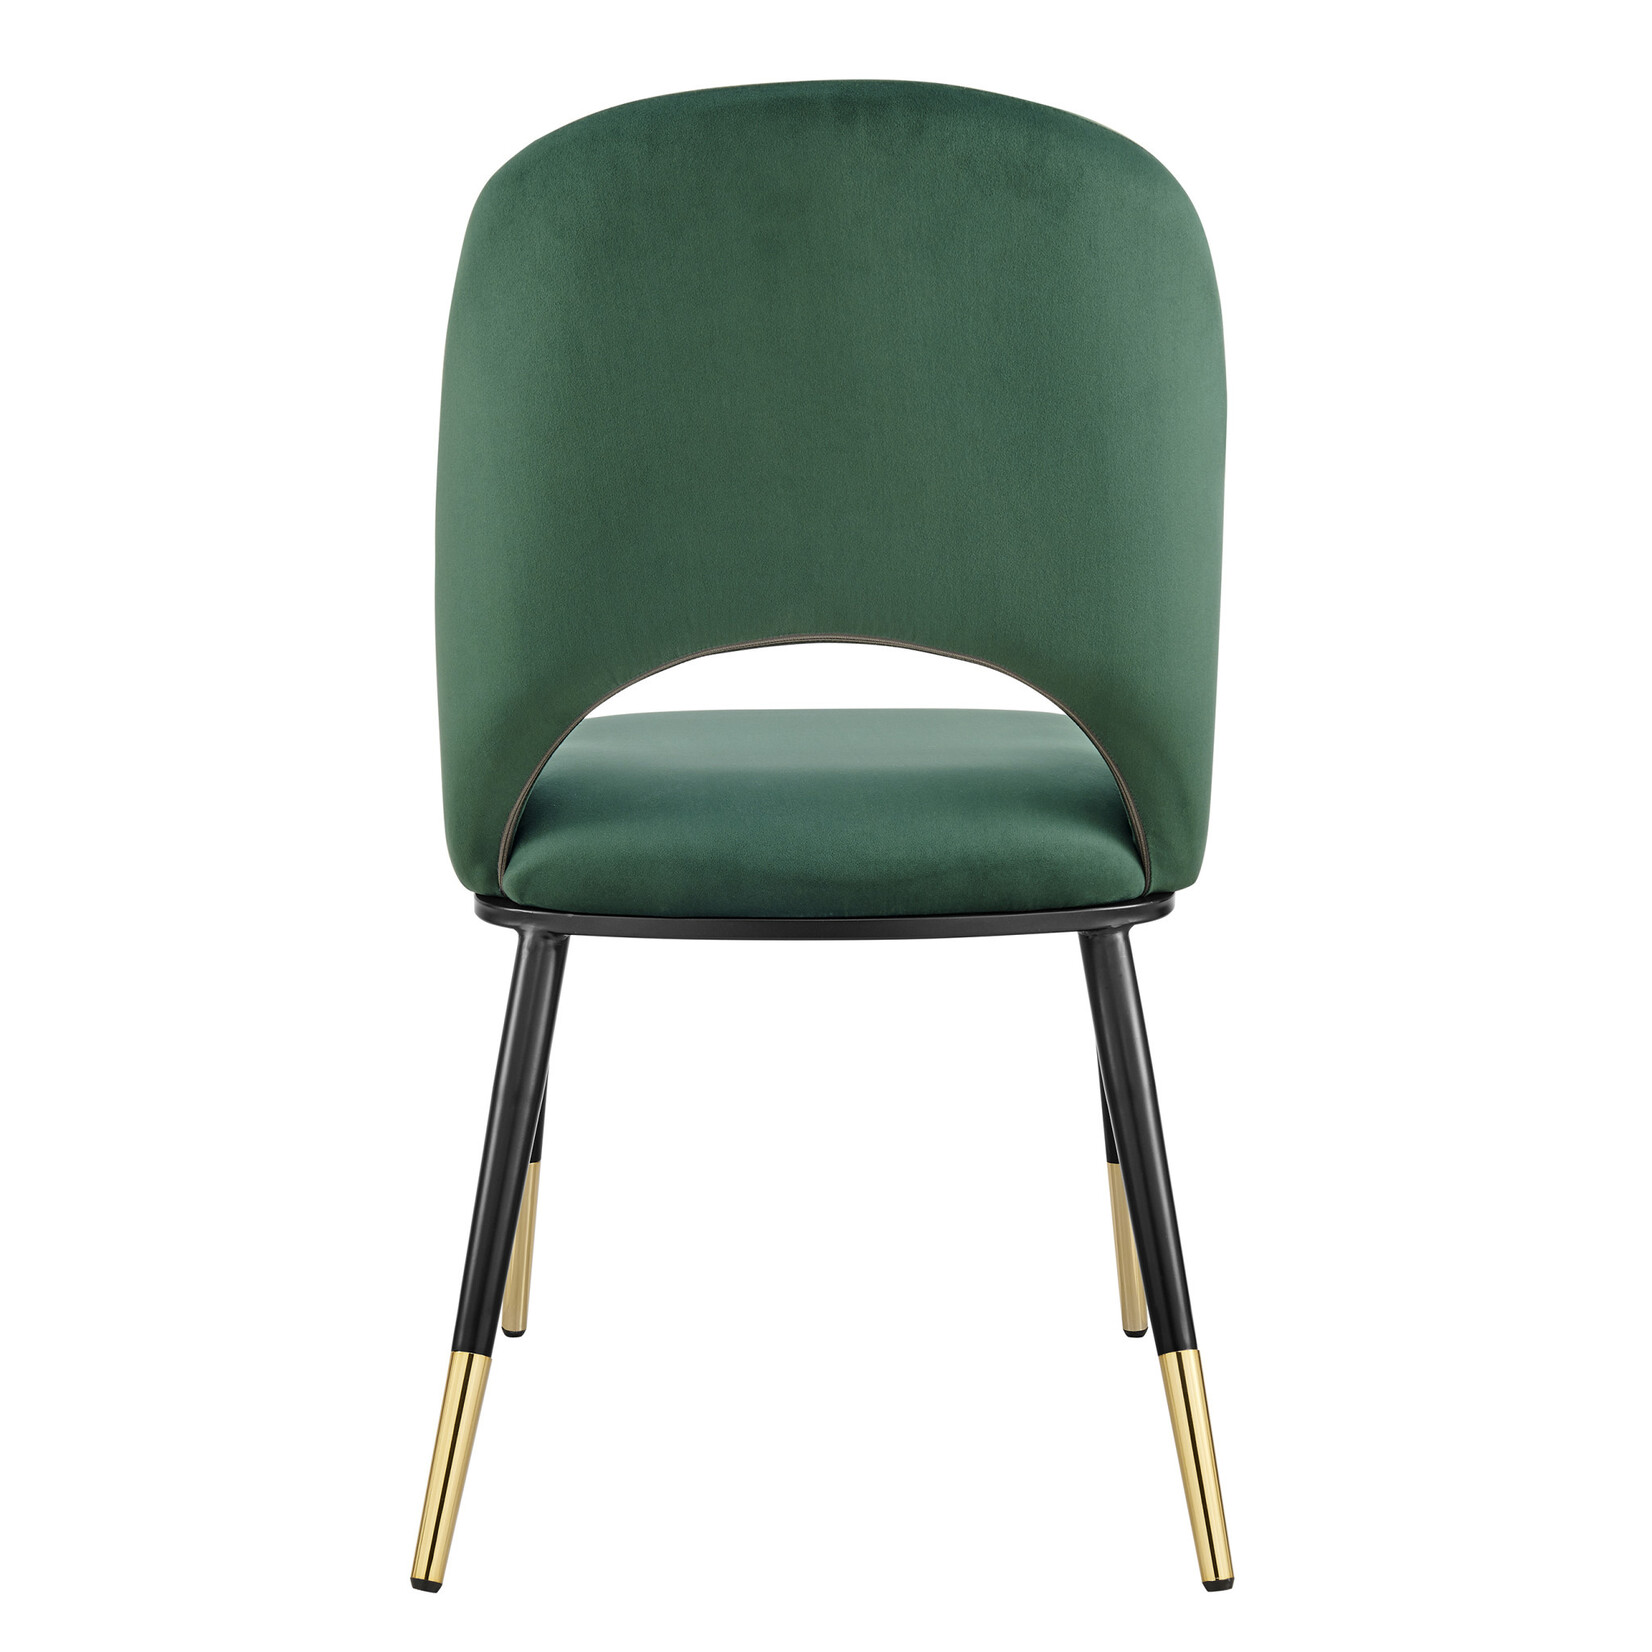 EuroStyle Alby Side Chair Green